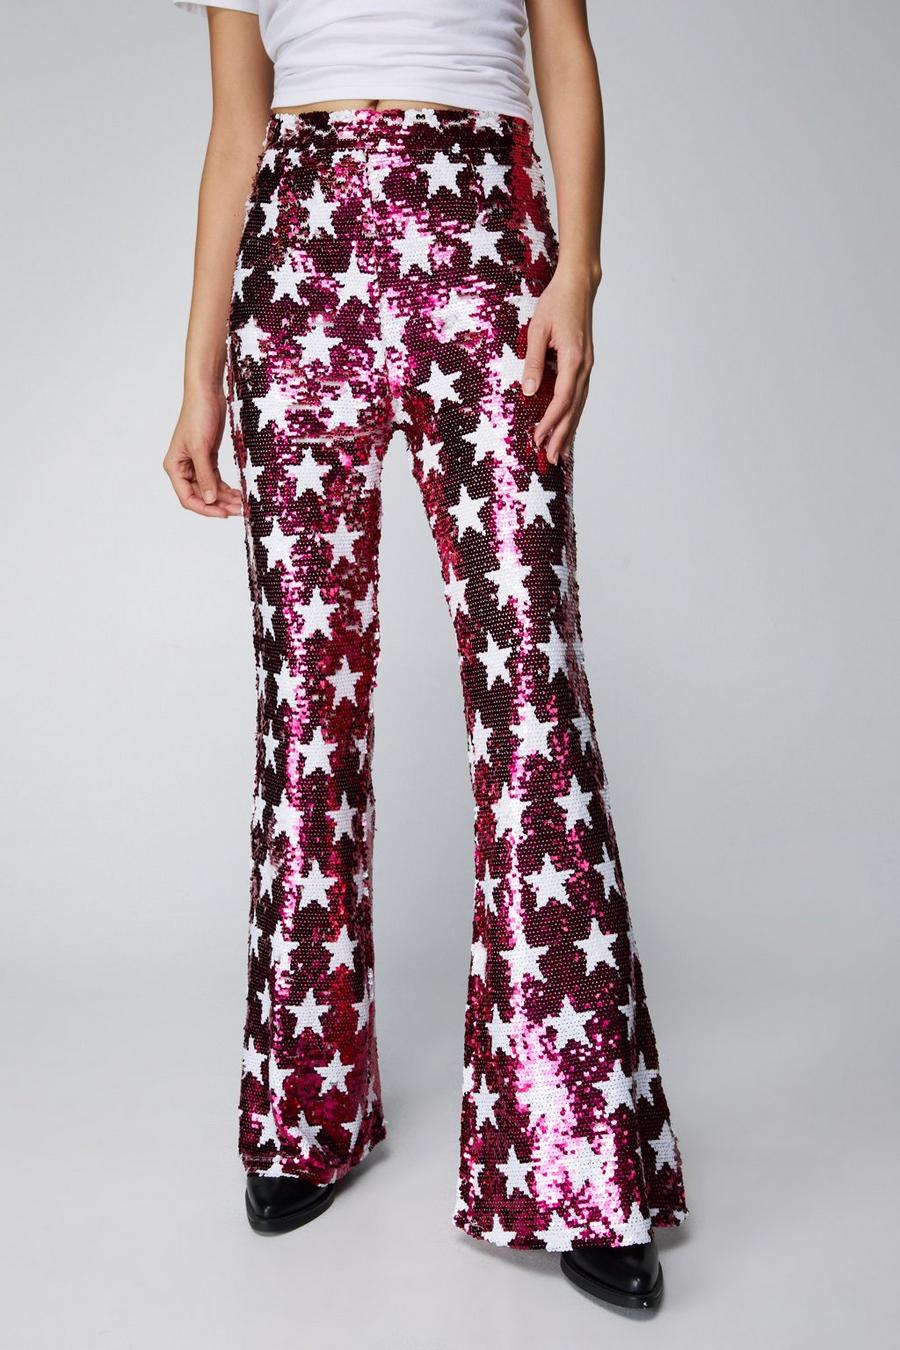 FOCUSNORM Womens Sequin Pants High Waisted Sparkle Bell Bottoms